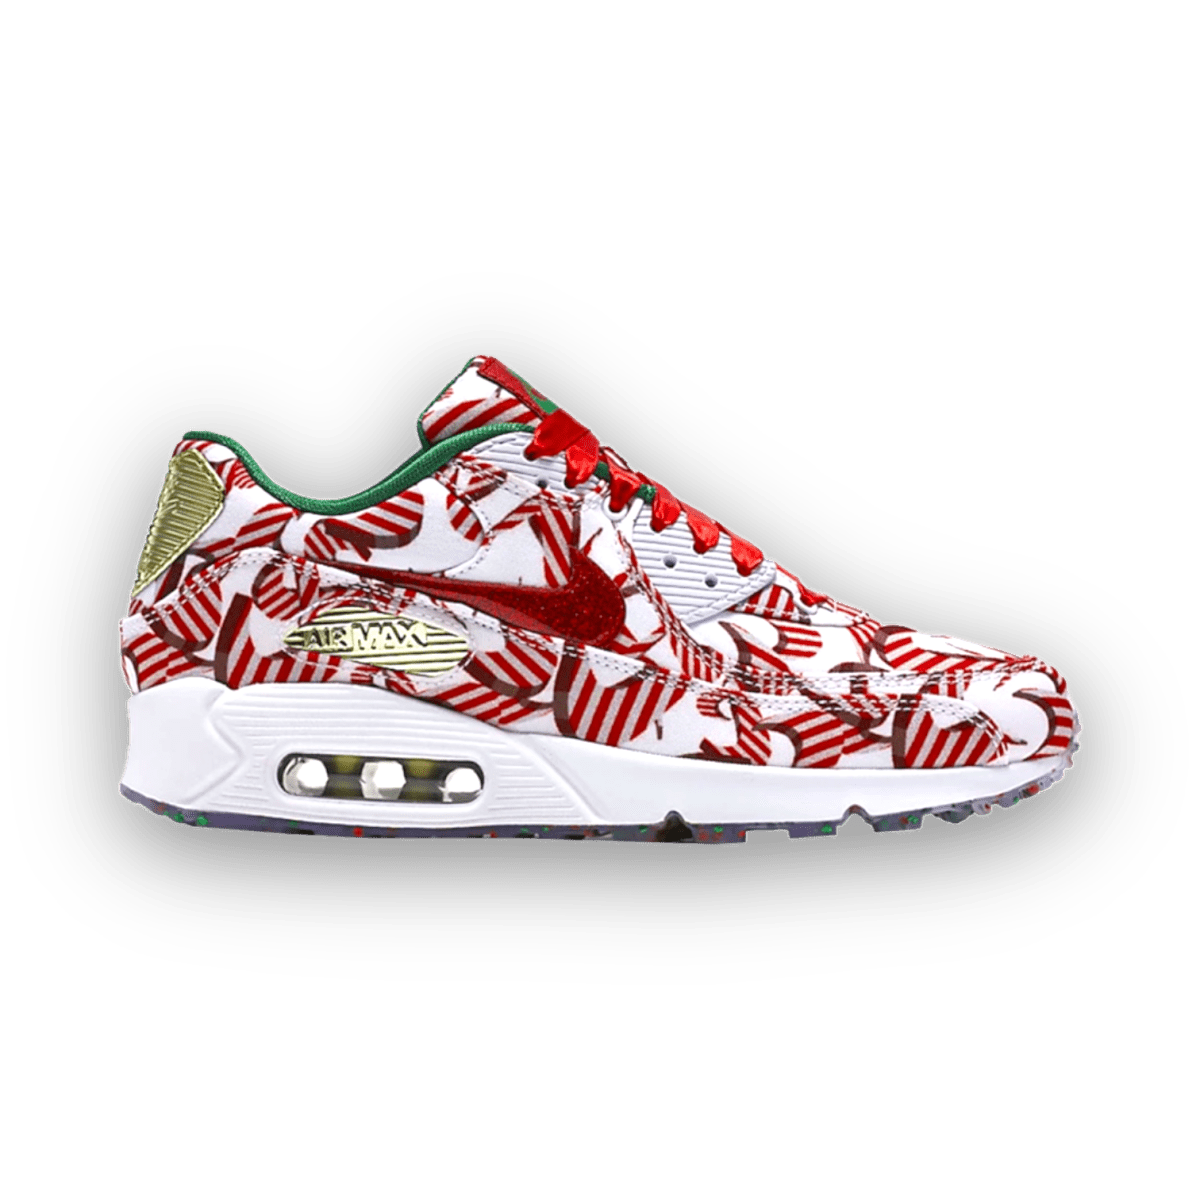 Air Max 90 'Gift Wrapped Pack' - Low Sneaker - Jawns on Fire Sneakers & Streetwear